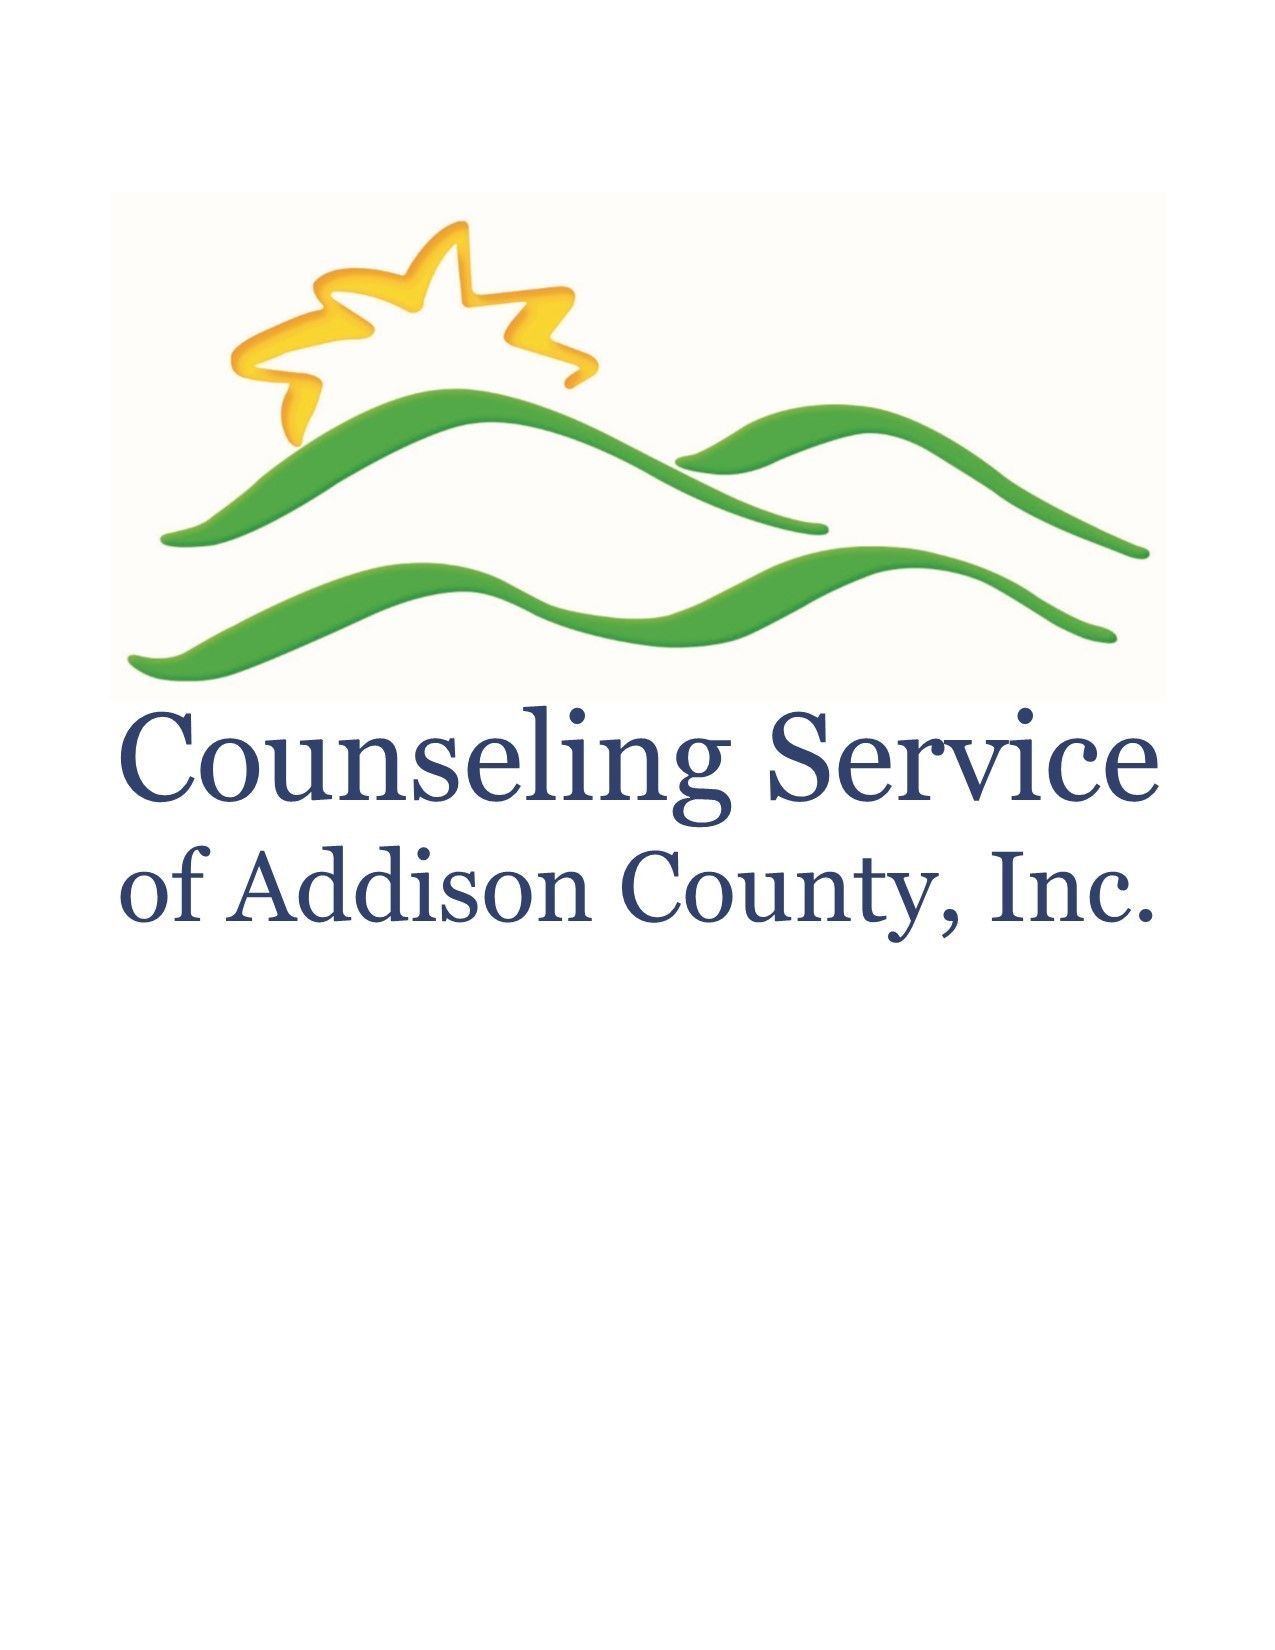 Significant pay rate, salary increases announced at Counseling Service of Addison County